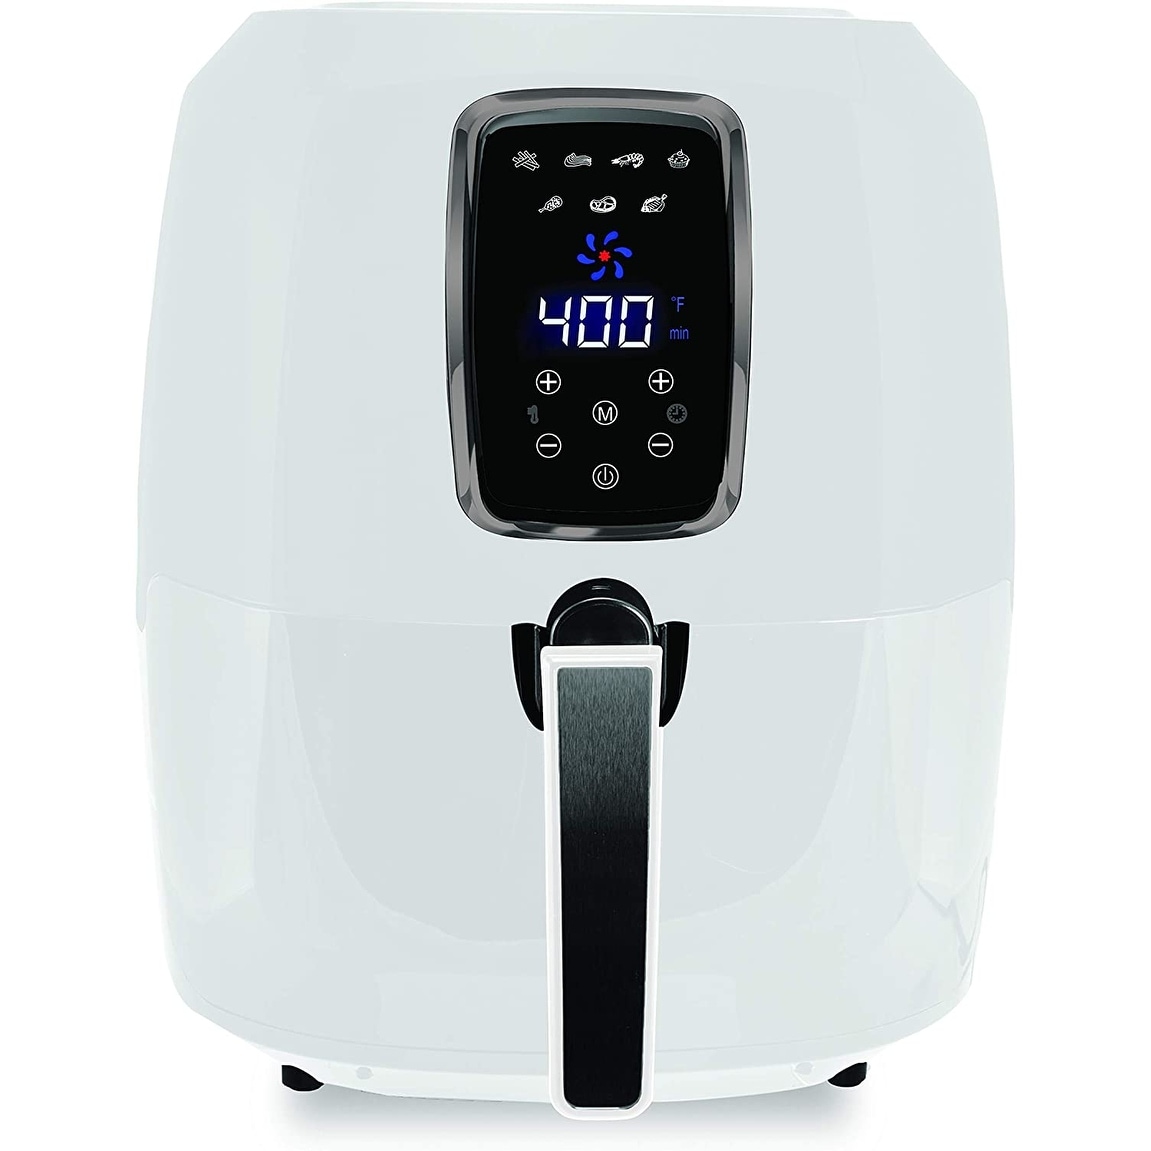 https://ak1.ostkcdn.com/images/products/is/images/direct/e1ca0afa04142948546da6a27bc0f99b3b5a030f/KALORIK-5.3-Quart-Digital-Air-Fryer-XL%2CWhite-Refurbished.jpg